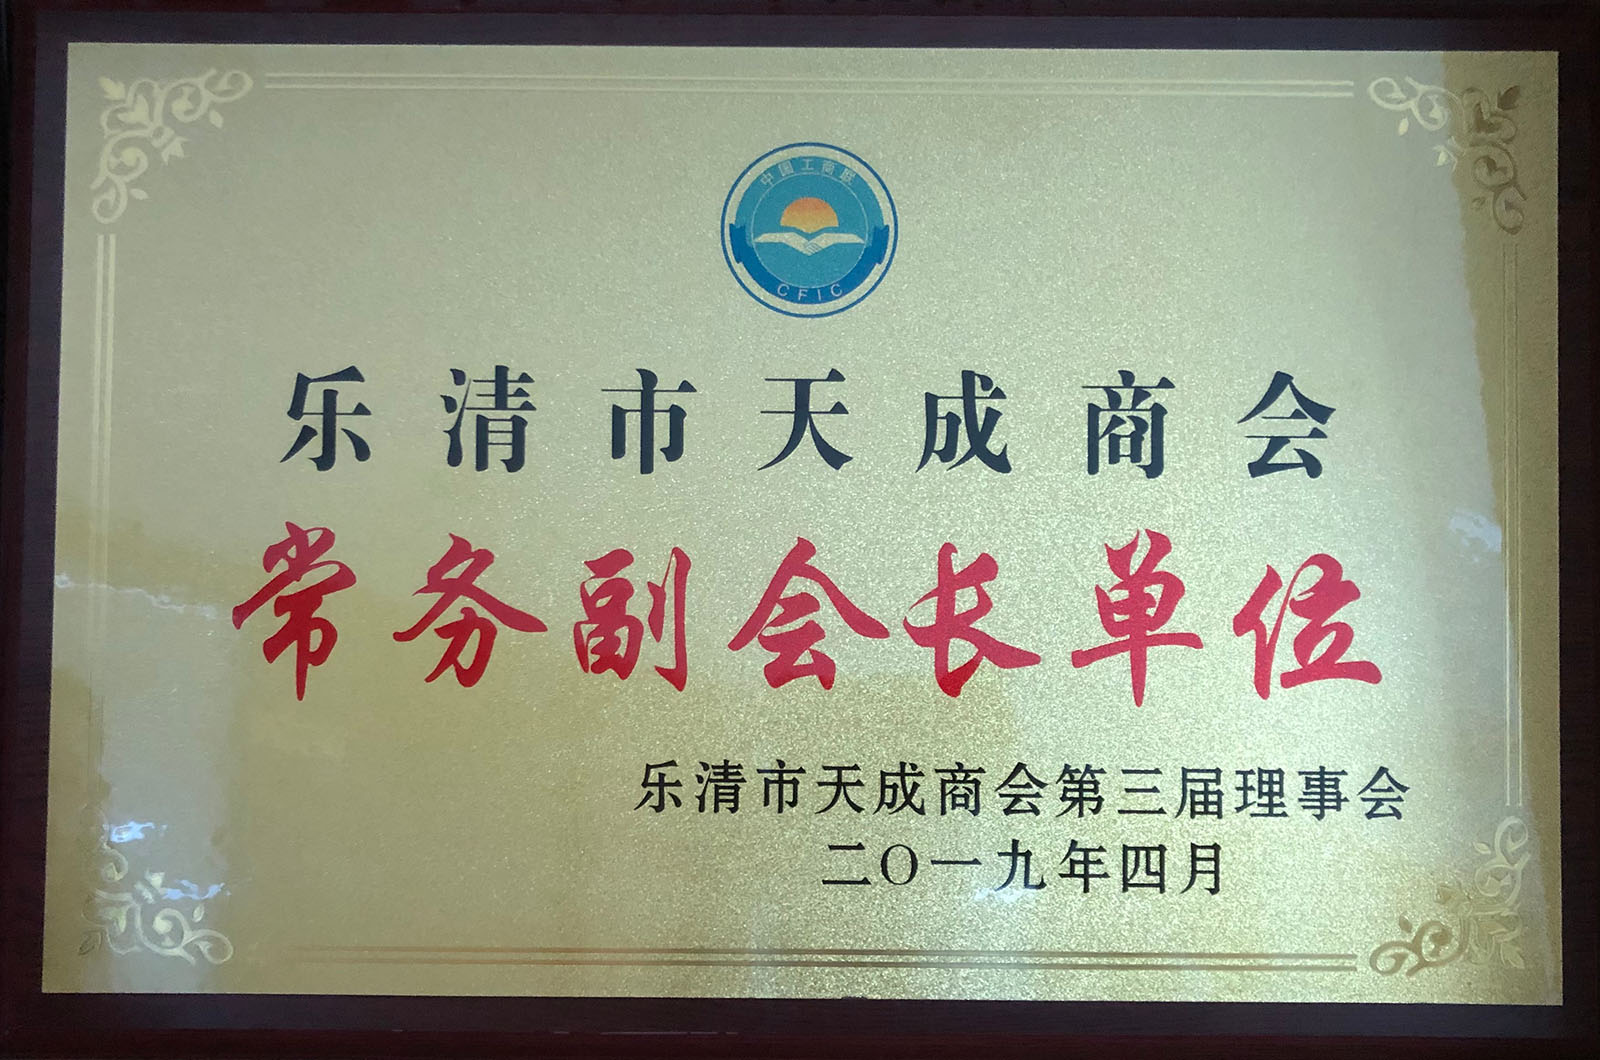 Executive vice president unit of Yueqing Tiancheng chamber of Commerce